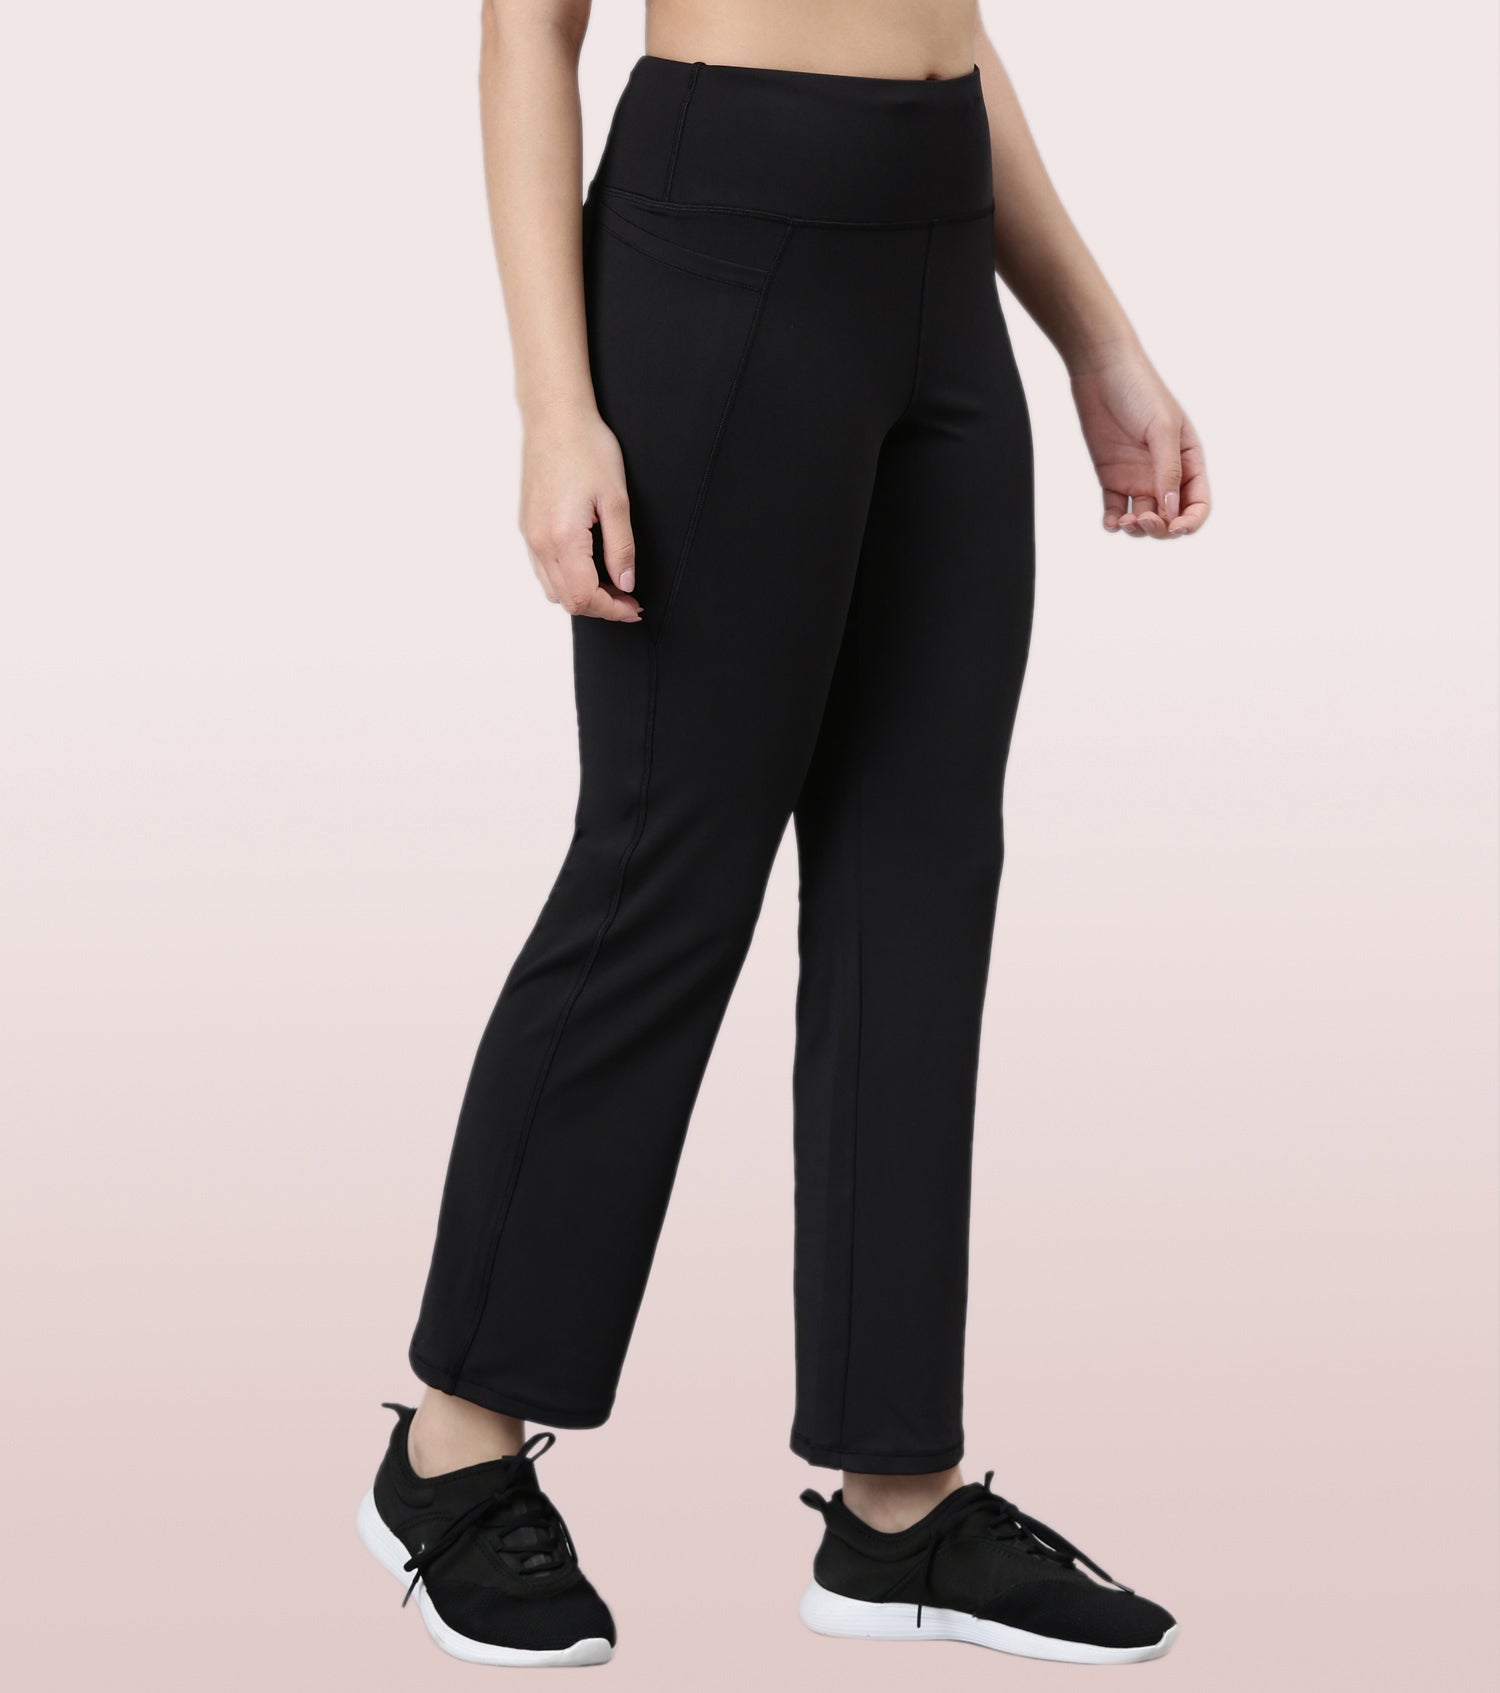 Enamor Boot Cut Active Pant | High Waist Workout Pant For Women | A402 